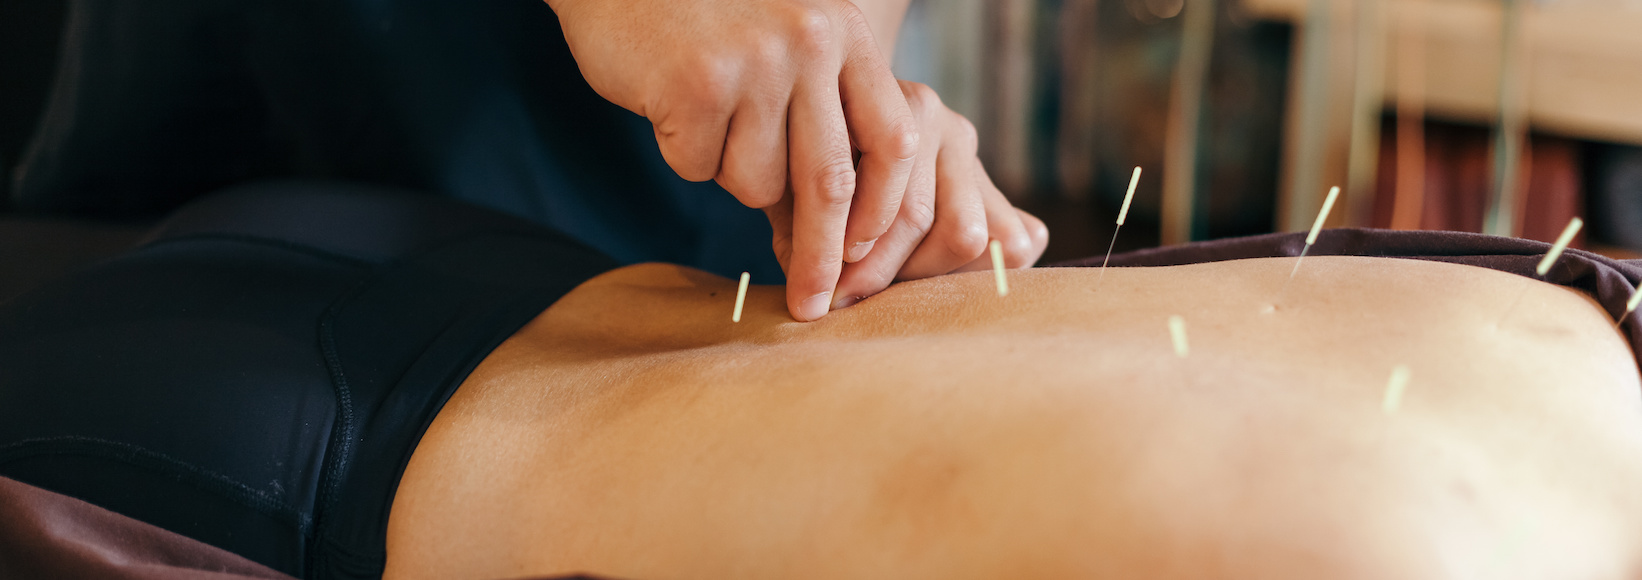 What is Dry Needling Really Like?